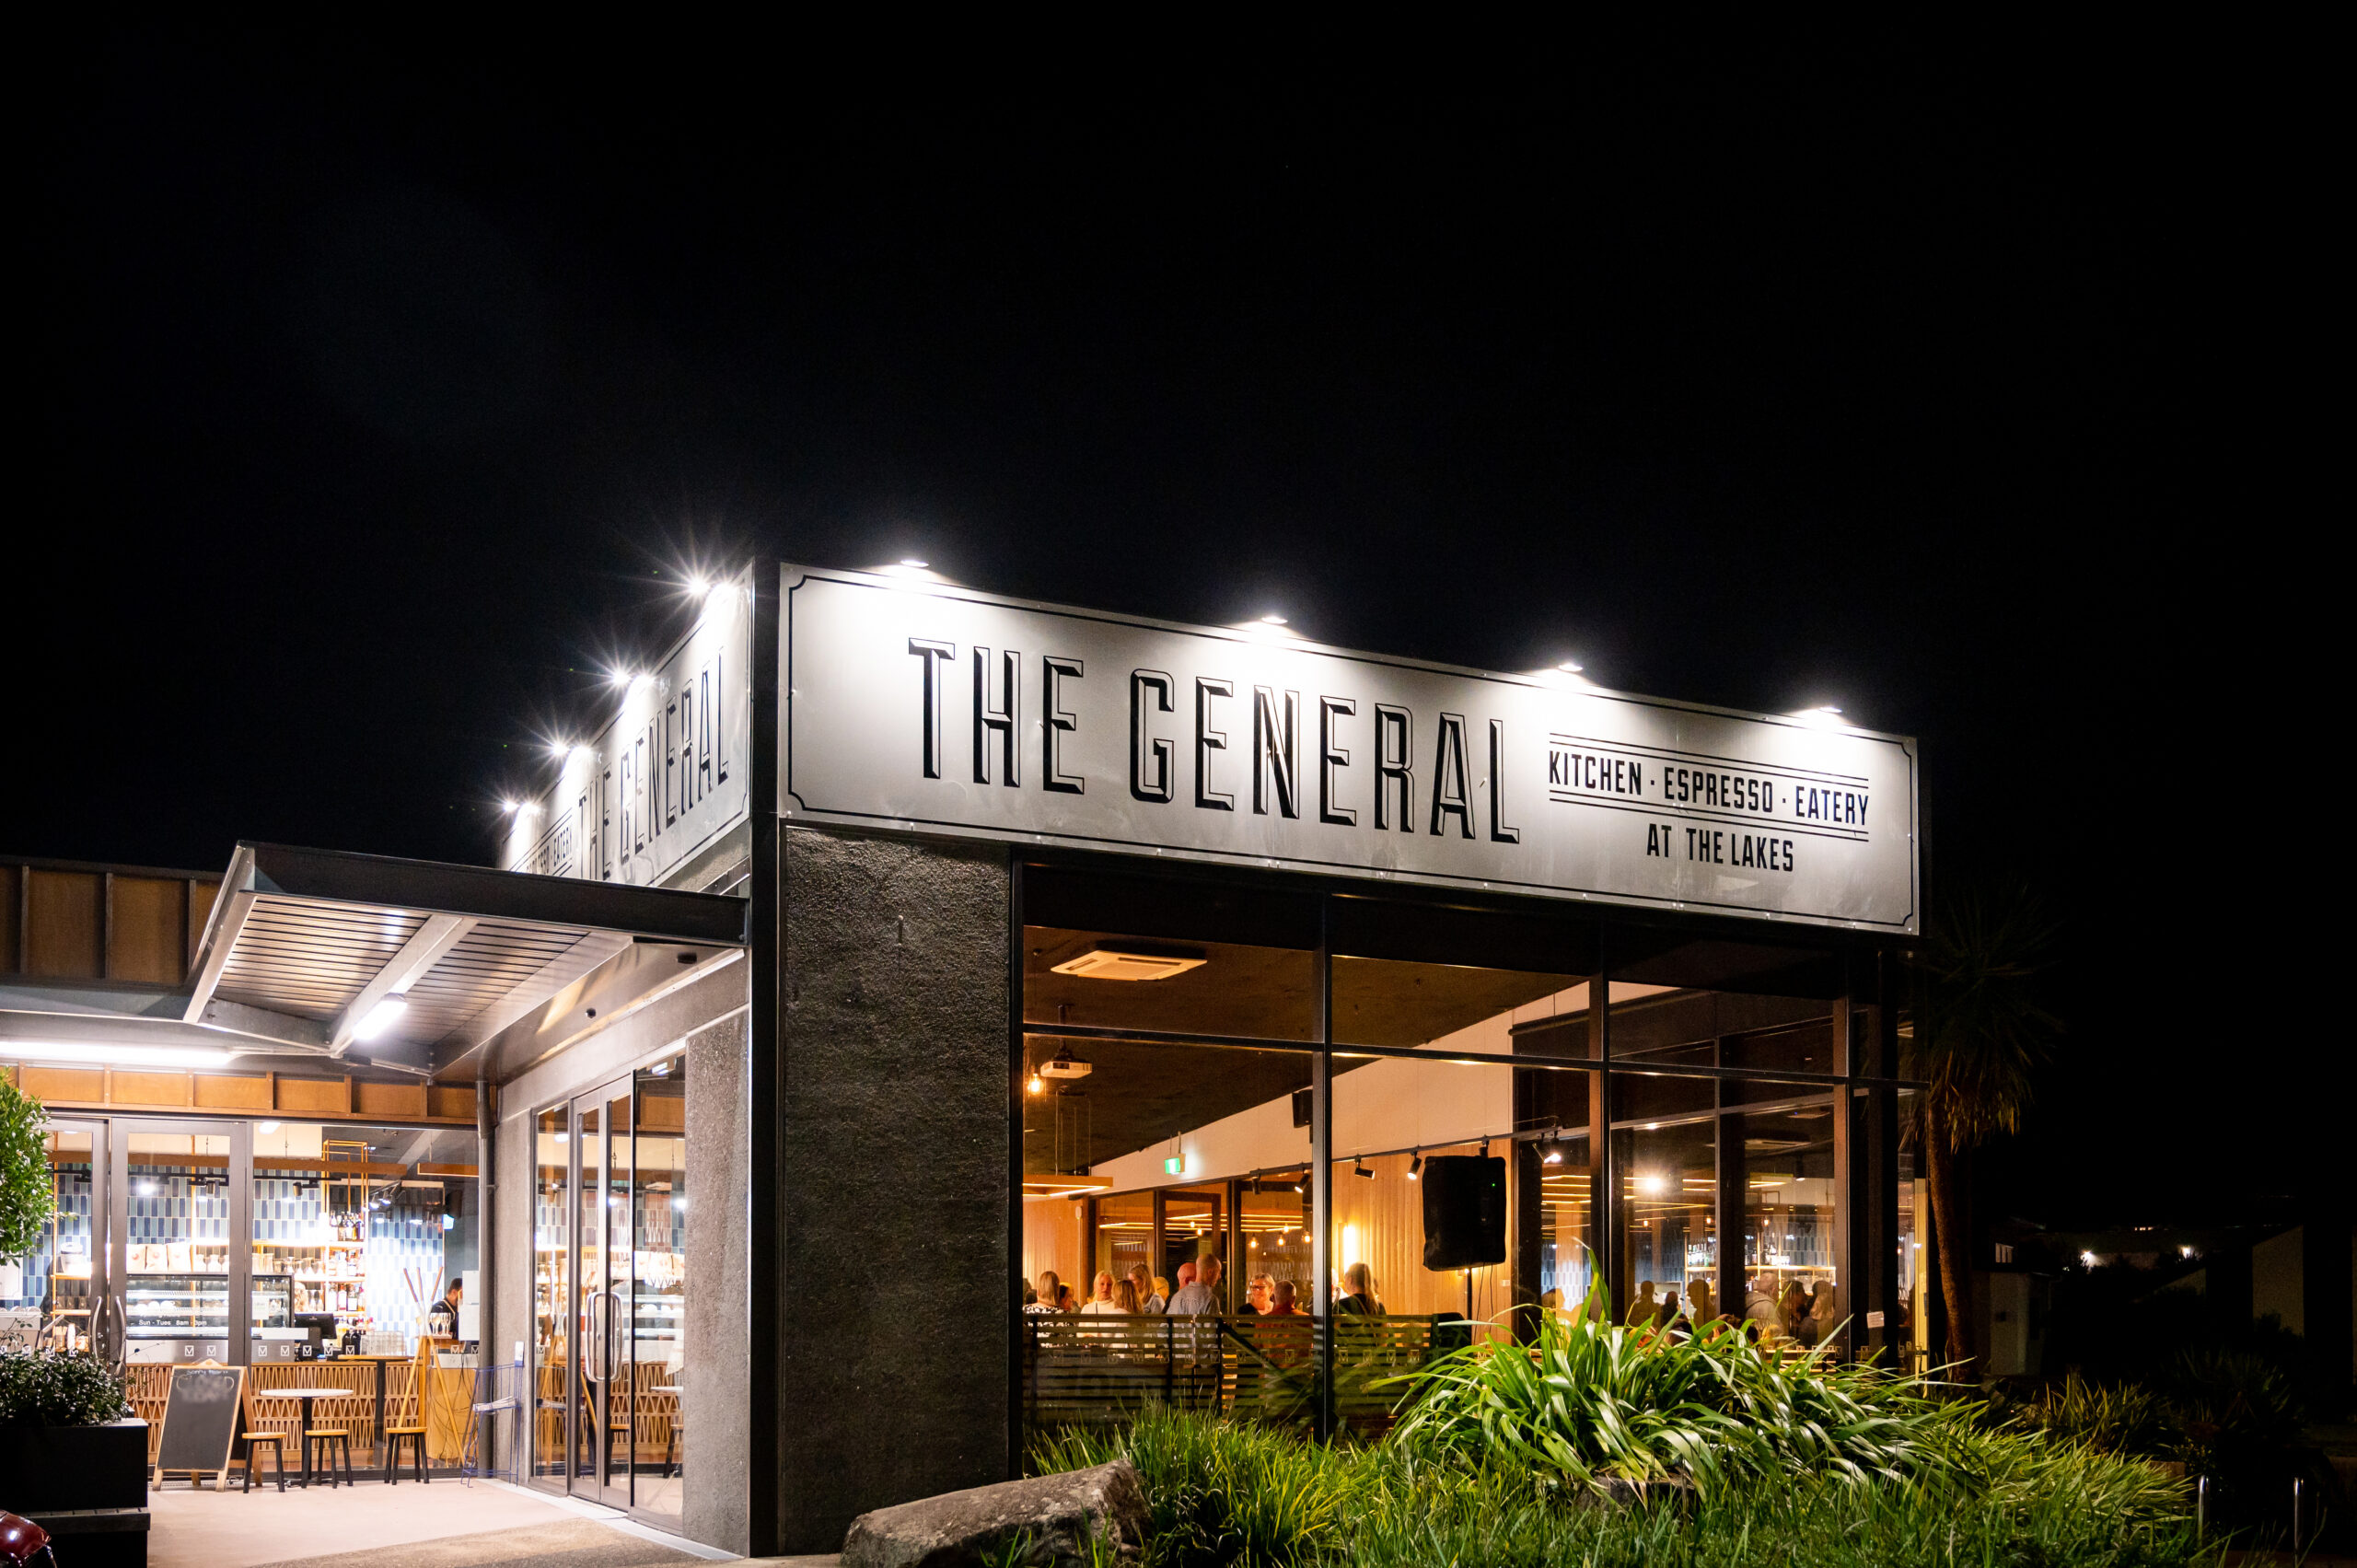 Enjoy poached eggs at The General cafe